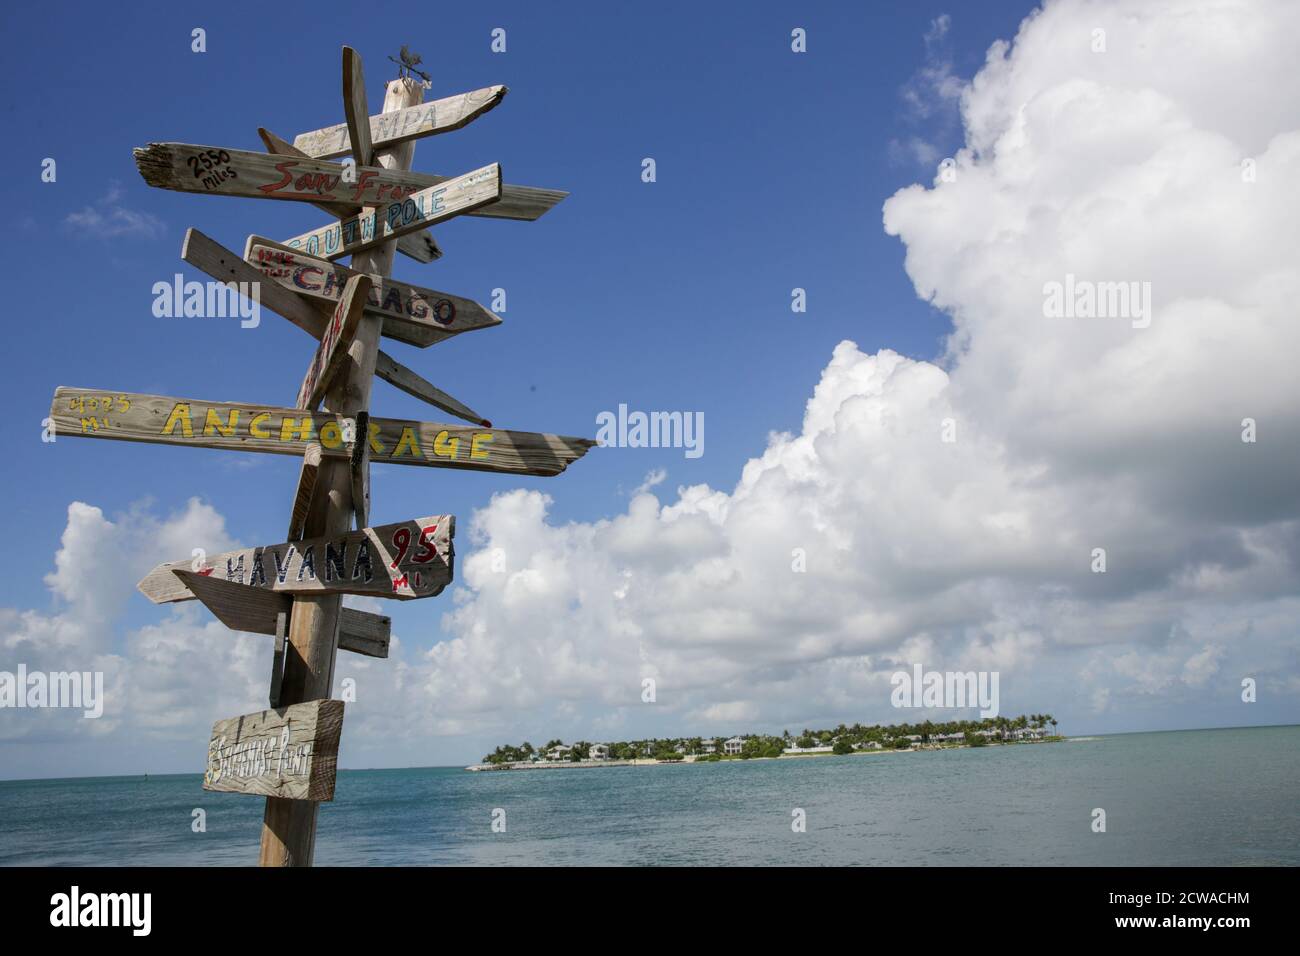 Popular direction and distance [in Miles] signs at the equally popular Sunset Pier Bar on Key West, Florida, USA. Stock Photo